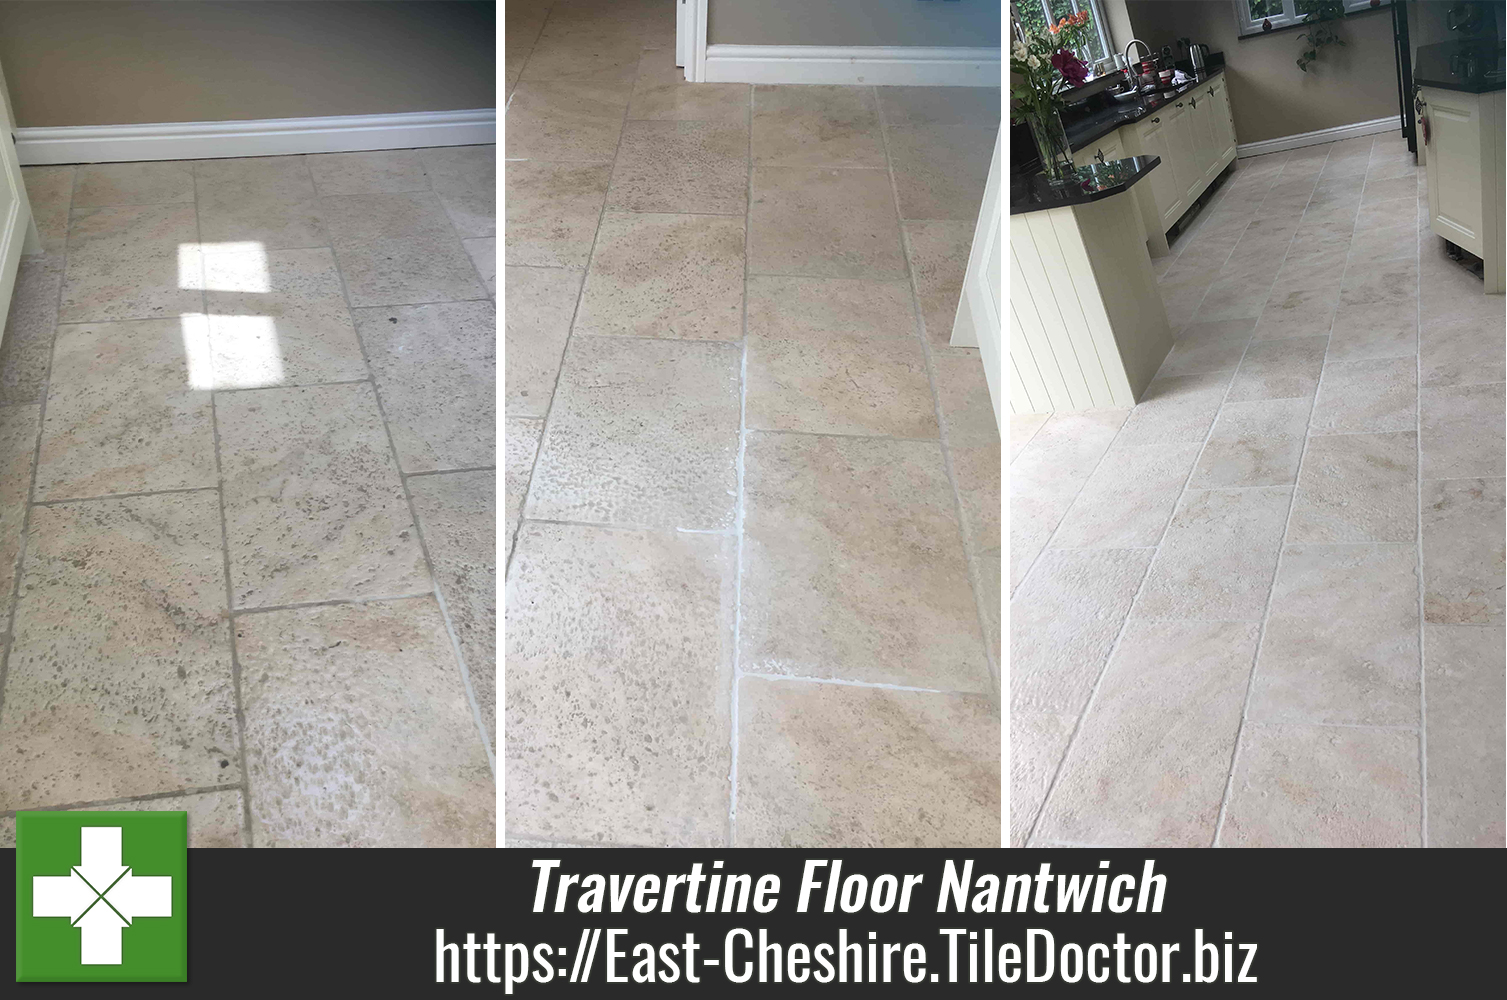 Travertine Kitchen Floor Before and After Cleaning Nantwich